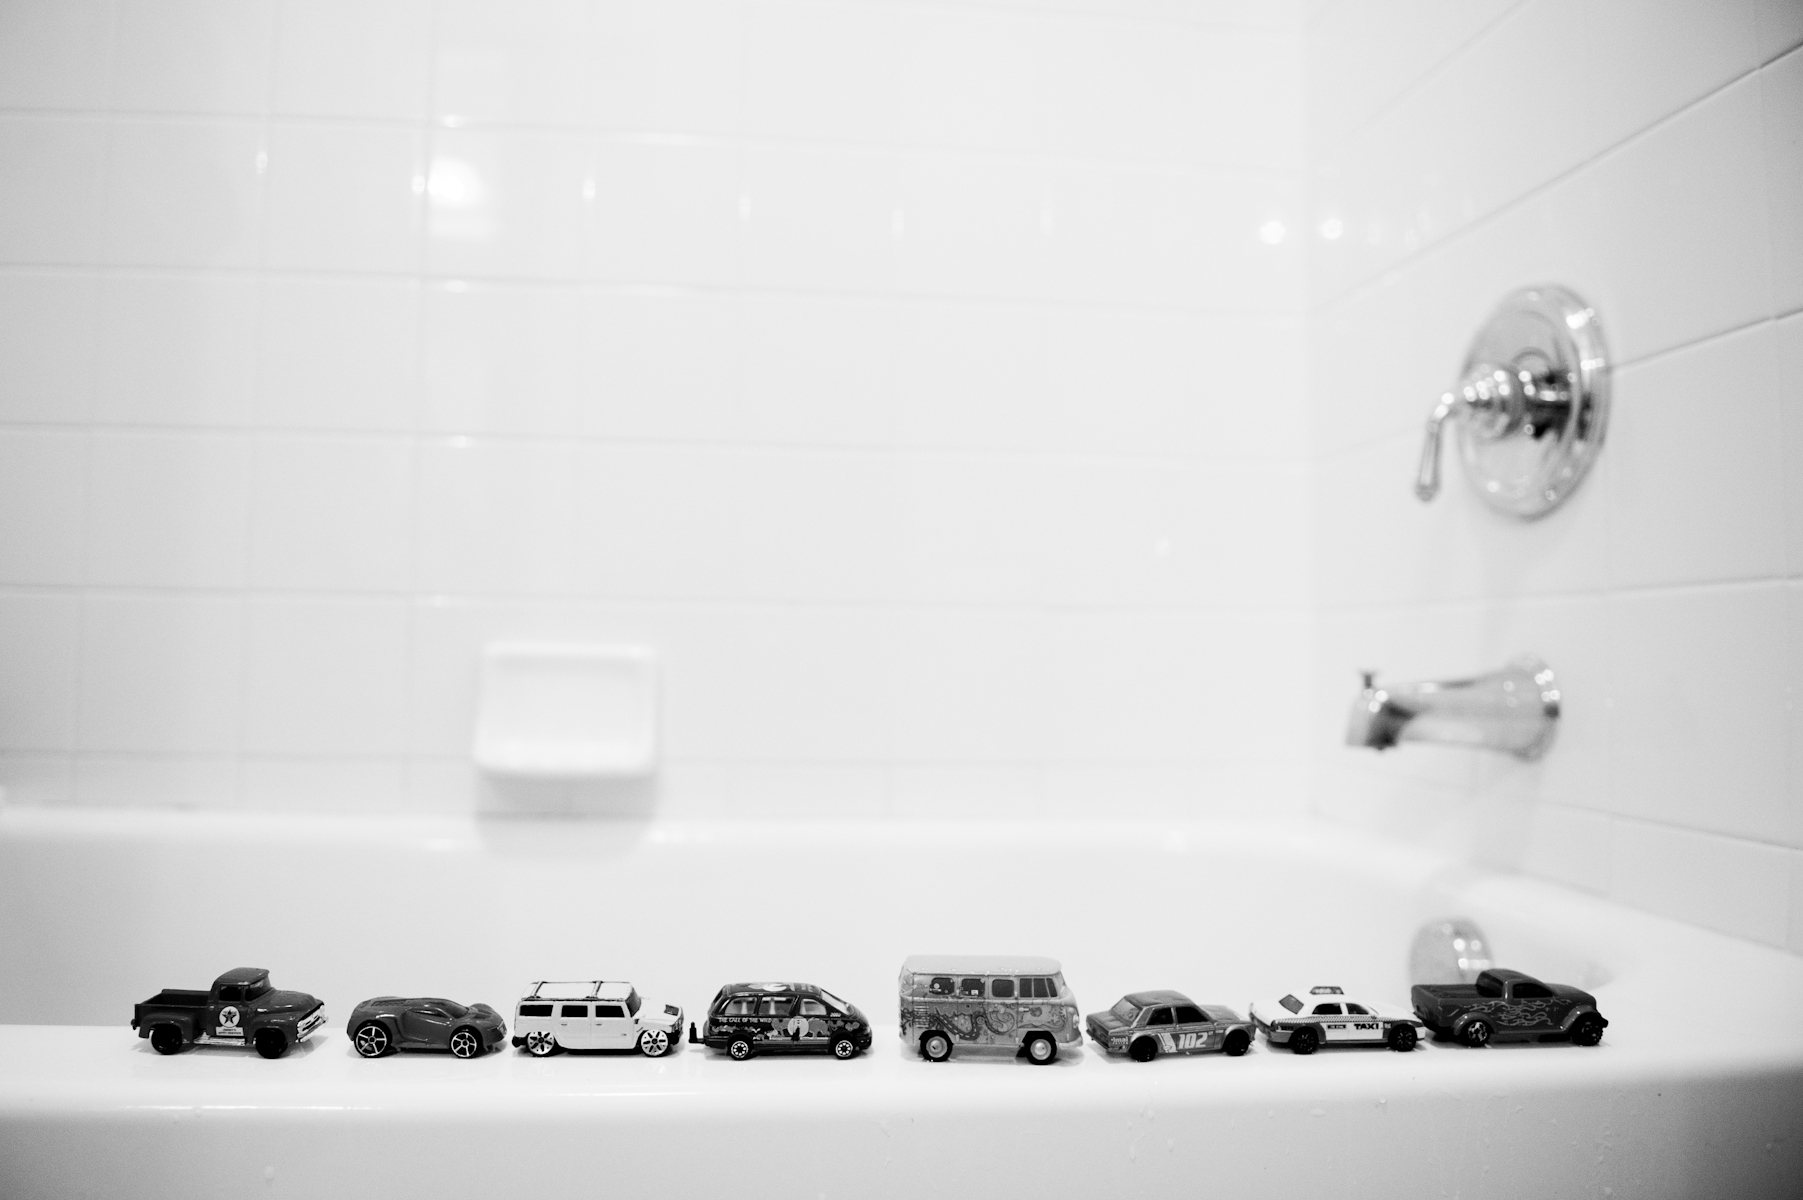 Brendan has precisely lined up toy cars up on the side of the bathtub since he was young. It made his parents nervous because Marcus had the same habit at the time he was diagnosed with autism. Repetitive, obsessive behavior is a classic sign of autism, but Brendan was merely imitating his brother.